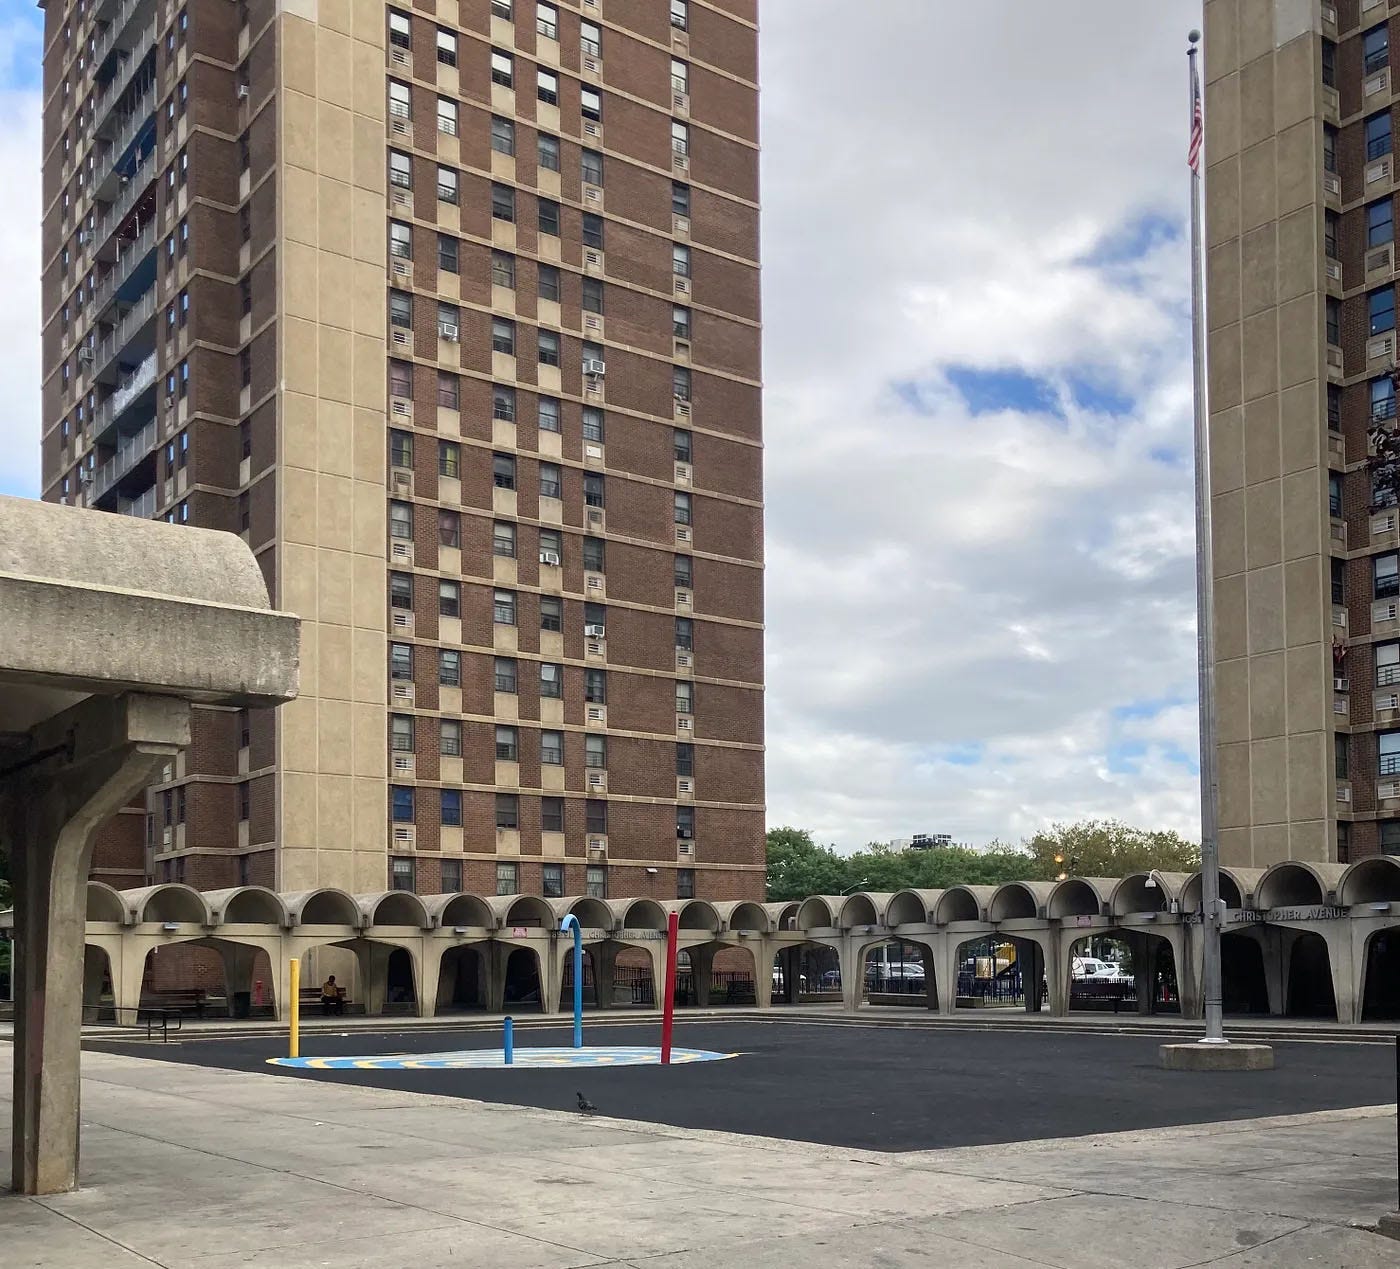 A photo of a concrete courtyard and two large birck apartment buildings.